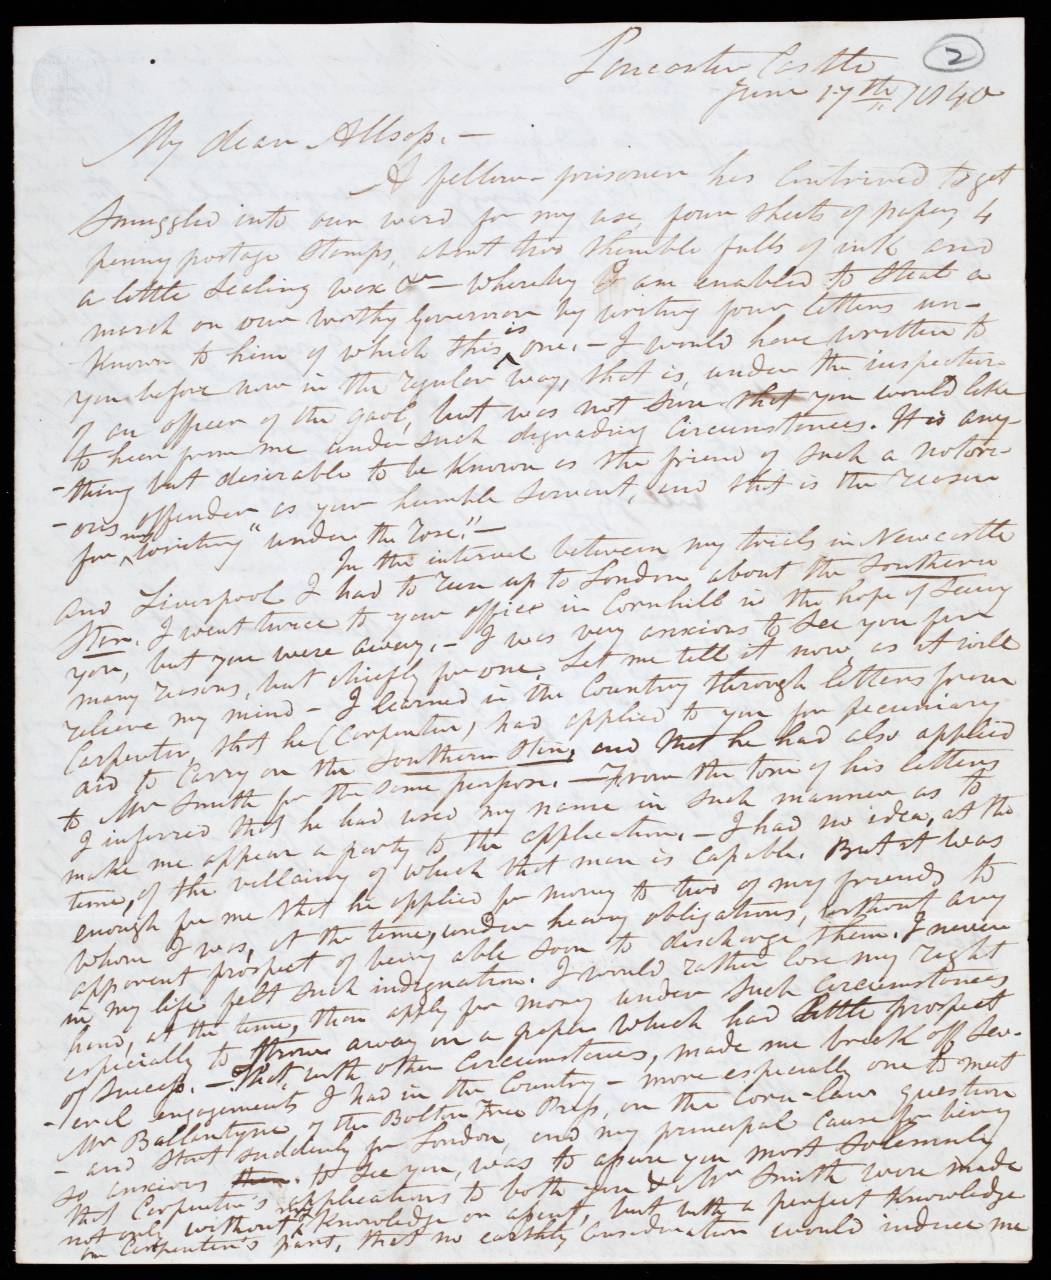 A page of a handwritten letter.